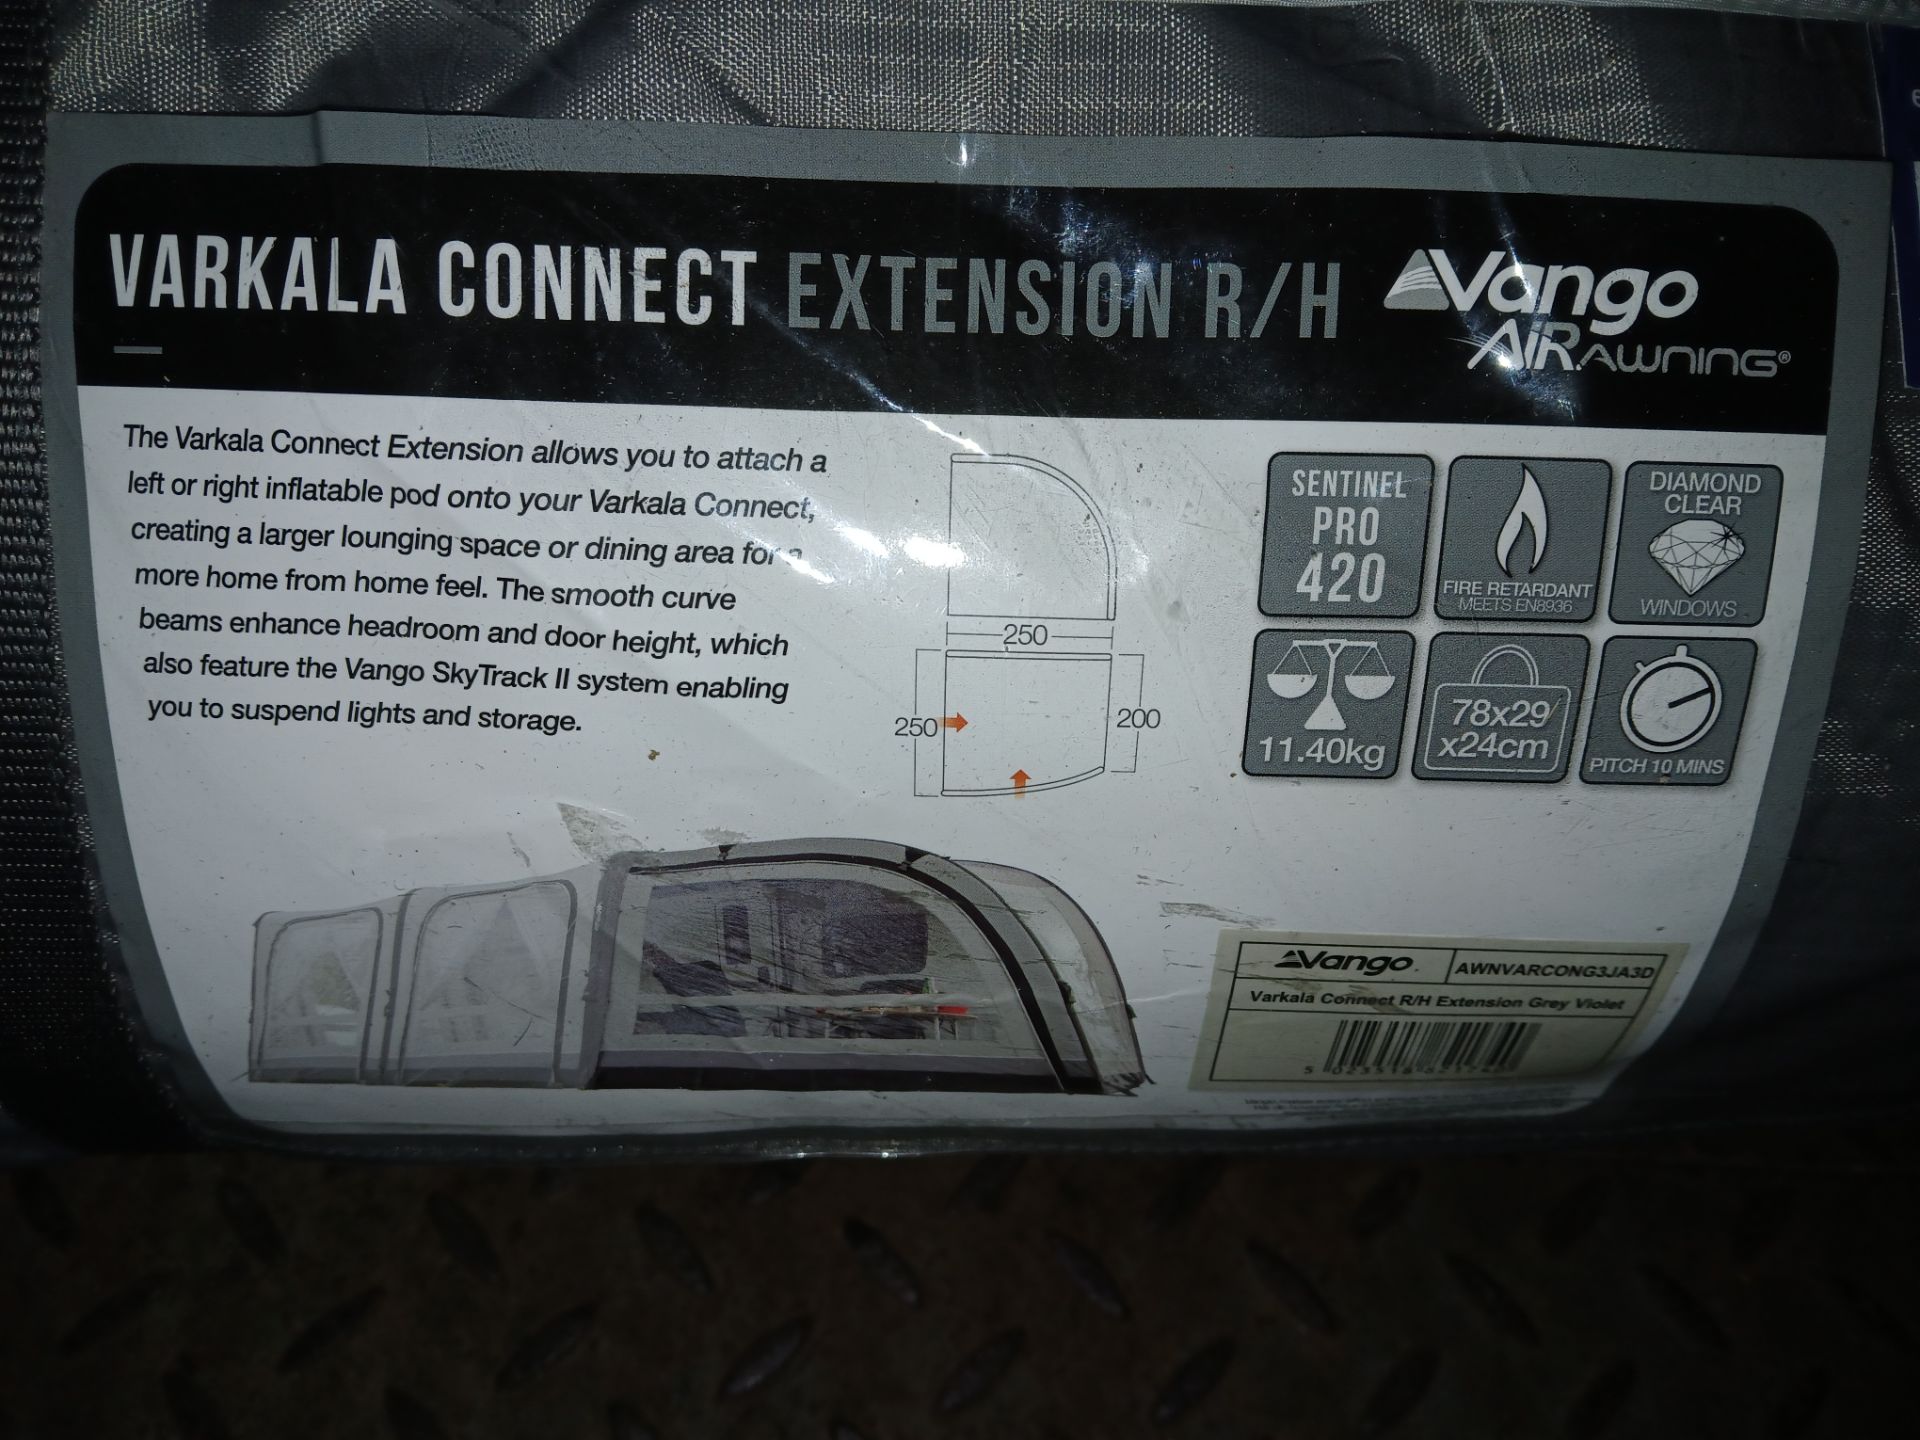 Vango Air Awning Varkala Connect Extension R/H - May be comptaible with Lot 106 (Please note, - Image 2 of 3